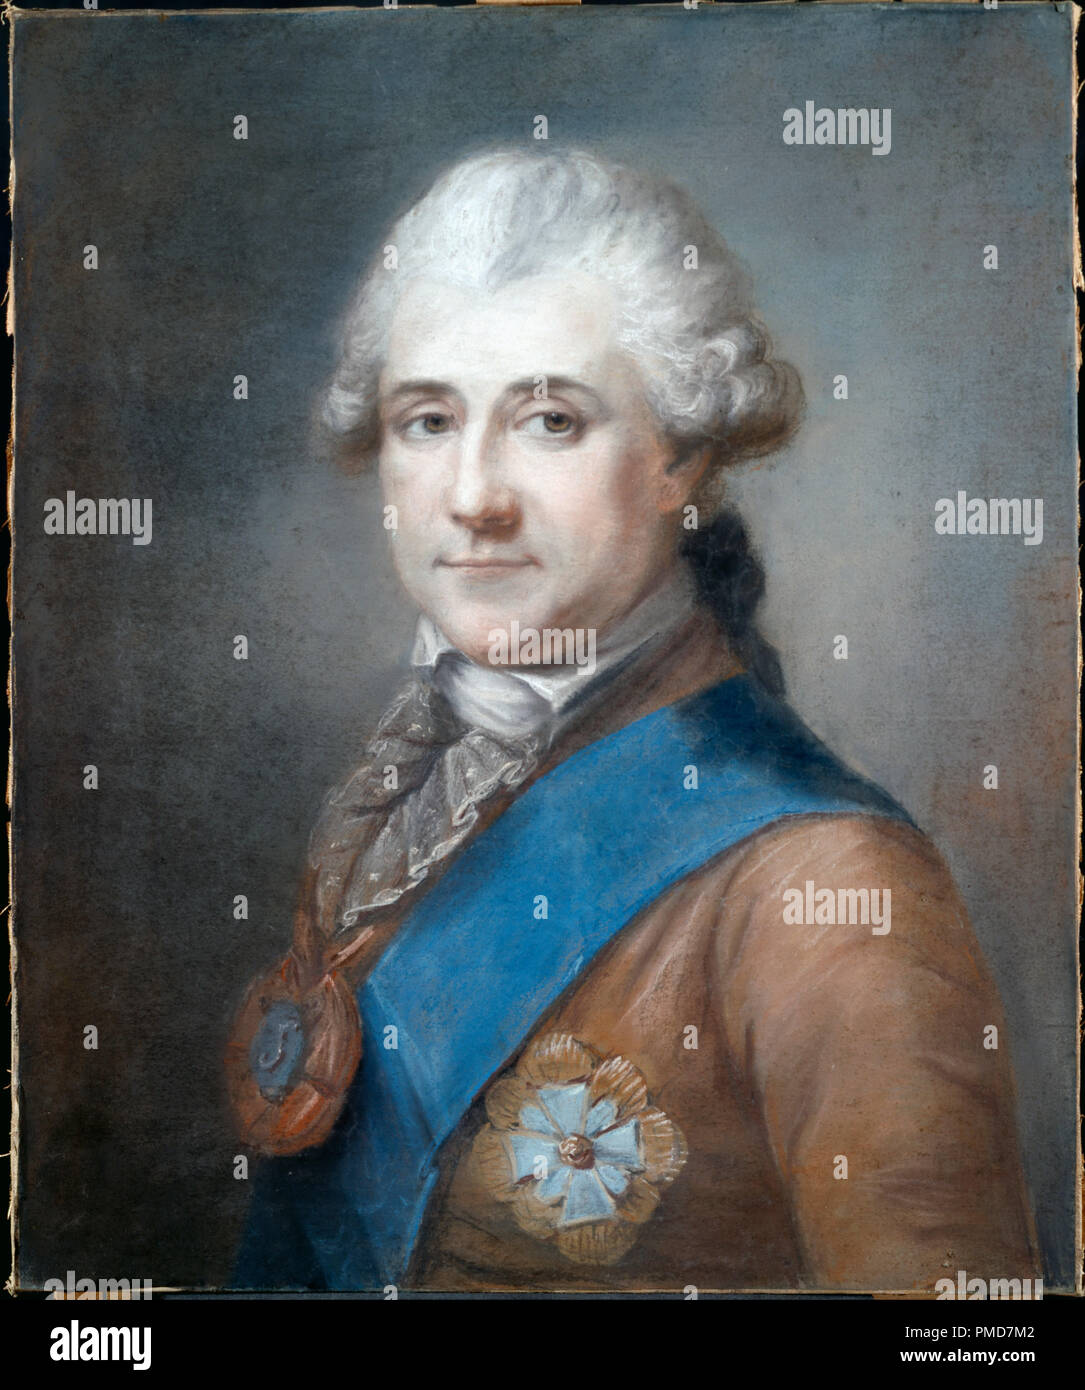 Stanislaus II Augustus, King of Poland. Date/Period: Ca. 1790?. Work on paper transferred to canvas. Pastel on paper mounted on canvas. Height: 609 mm (23.97 in); Width: 508 mm (20 in). Author: After Bacciarelli, Marcello. MARCELLO BACCIARELLI. Stock Photo